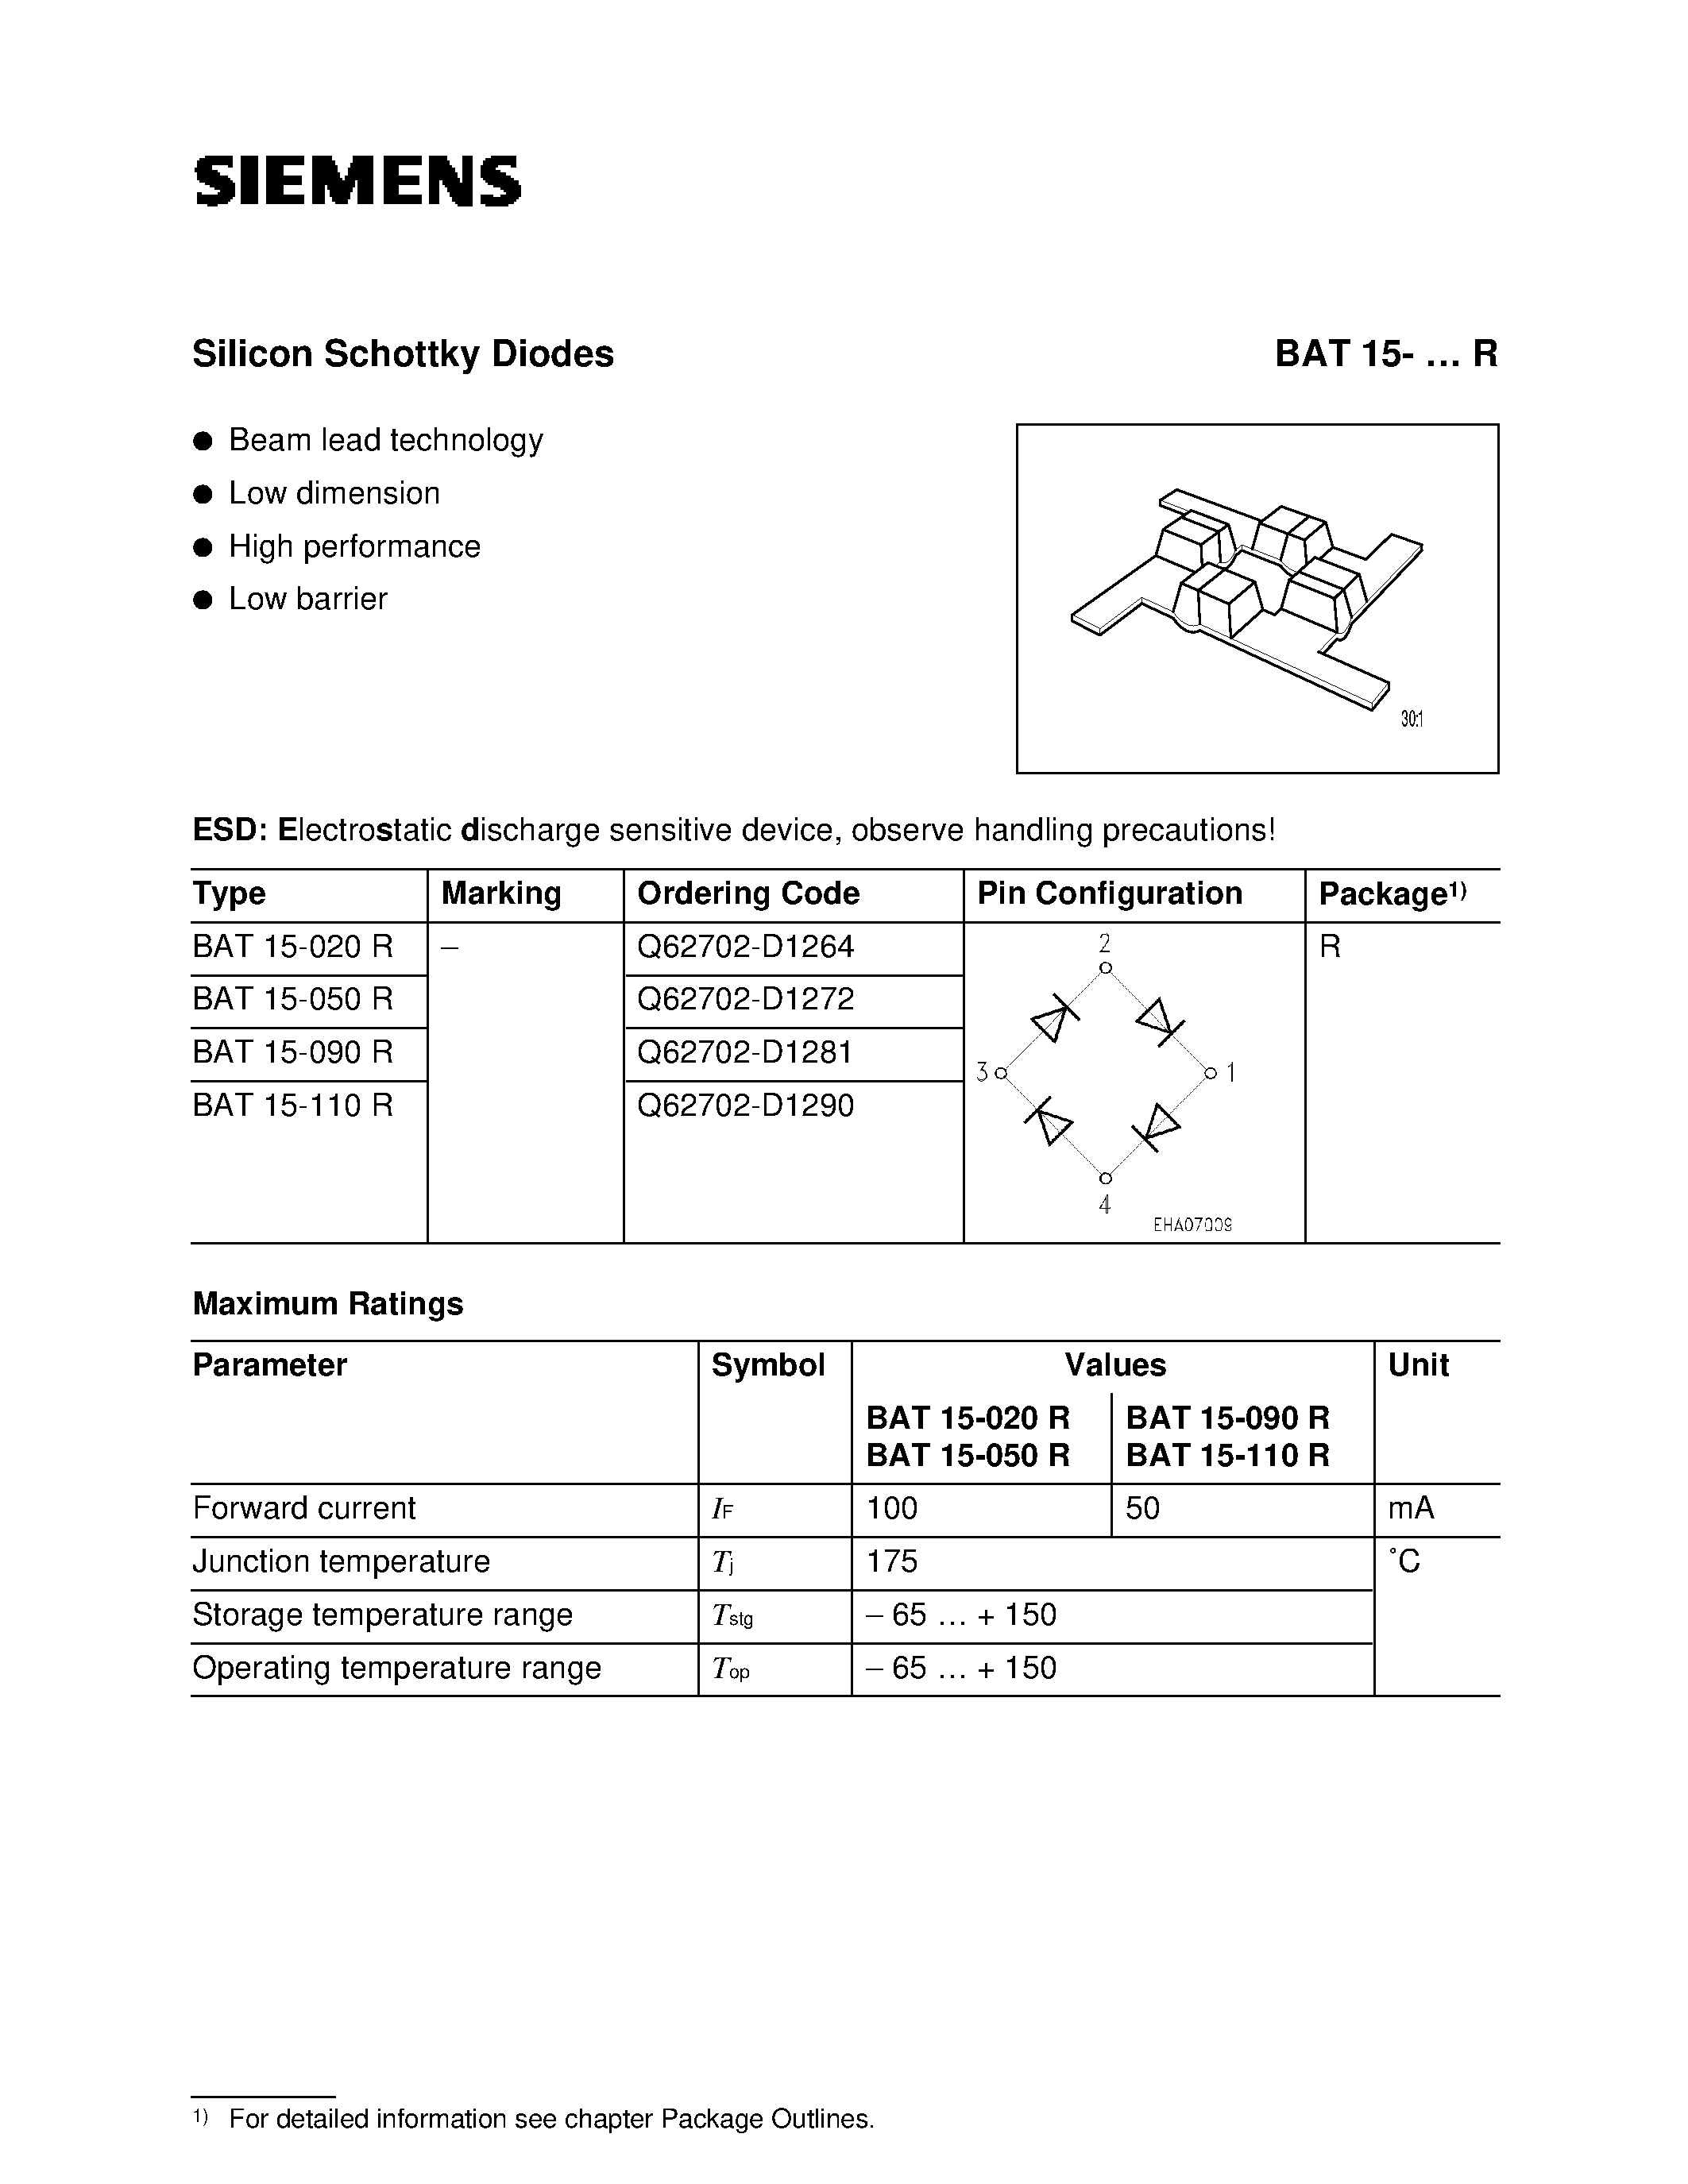 Datasheet BAT15-110R - Silicon Schottky Diodes (Beam lead technology Low dimension High performance Low barrier) page 1